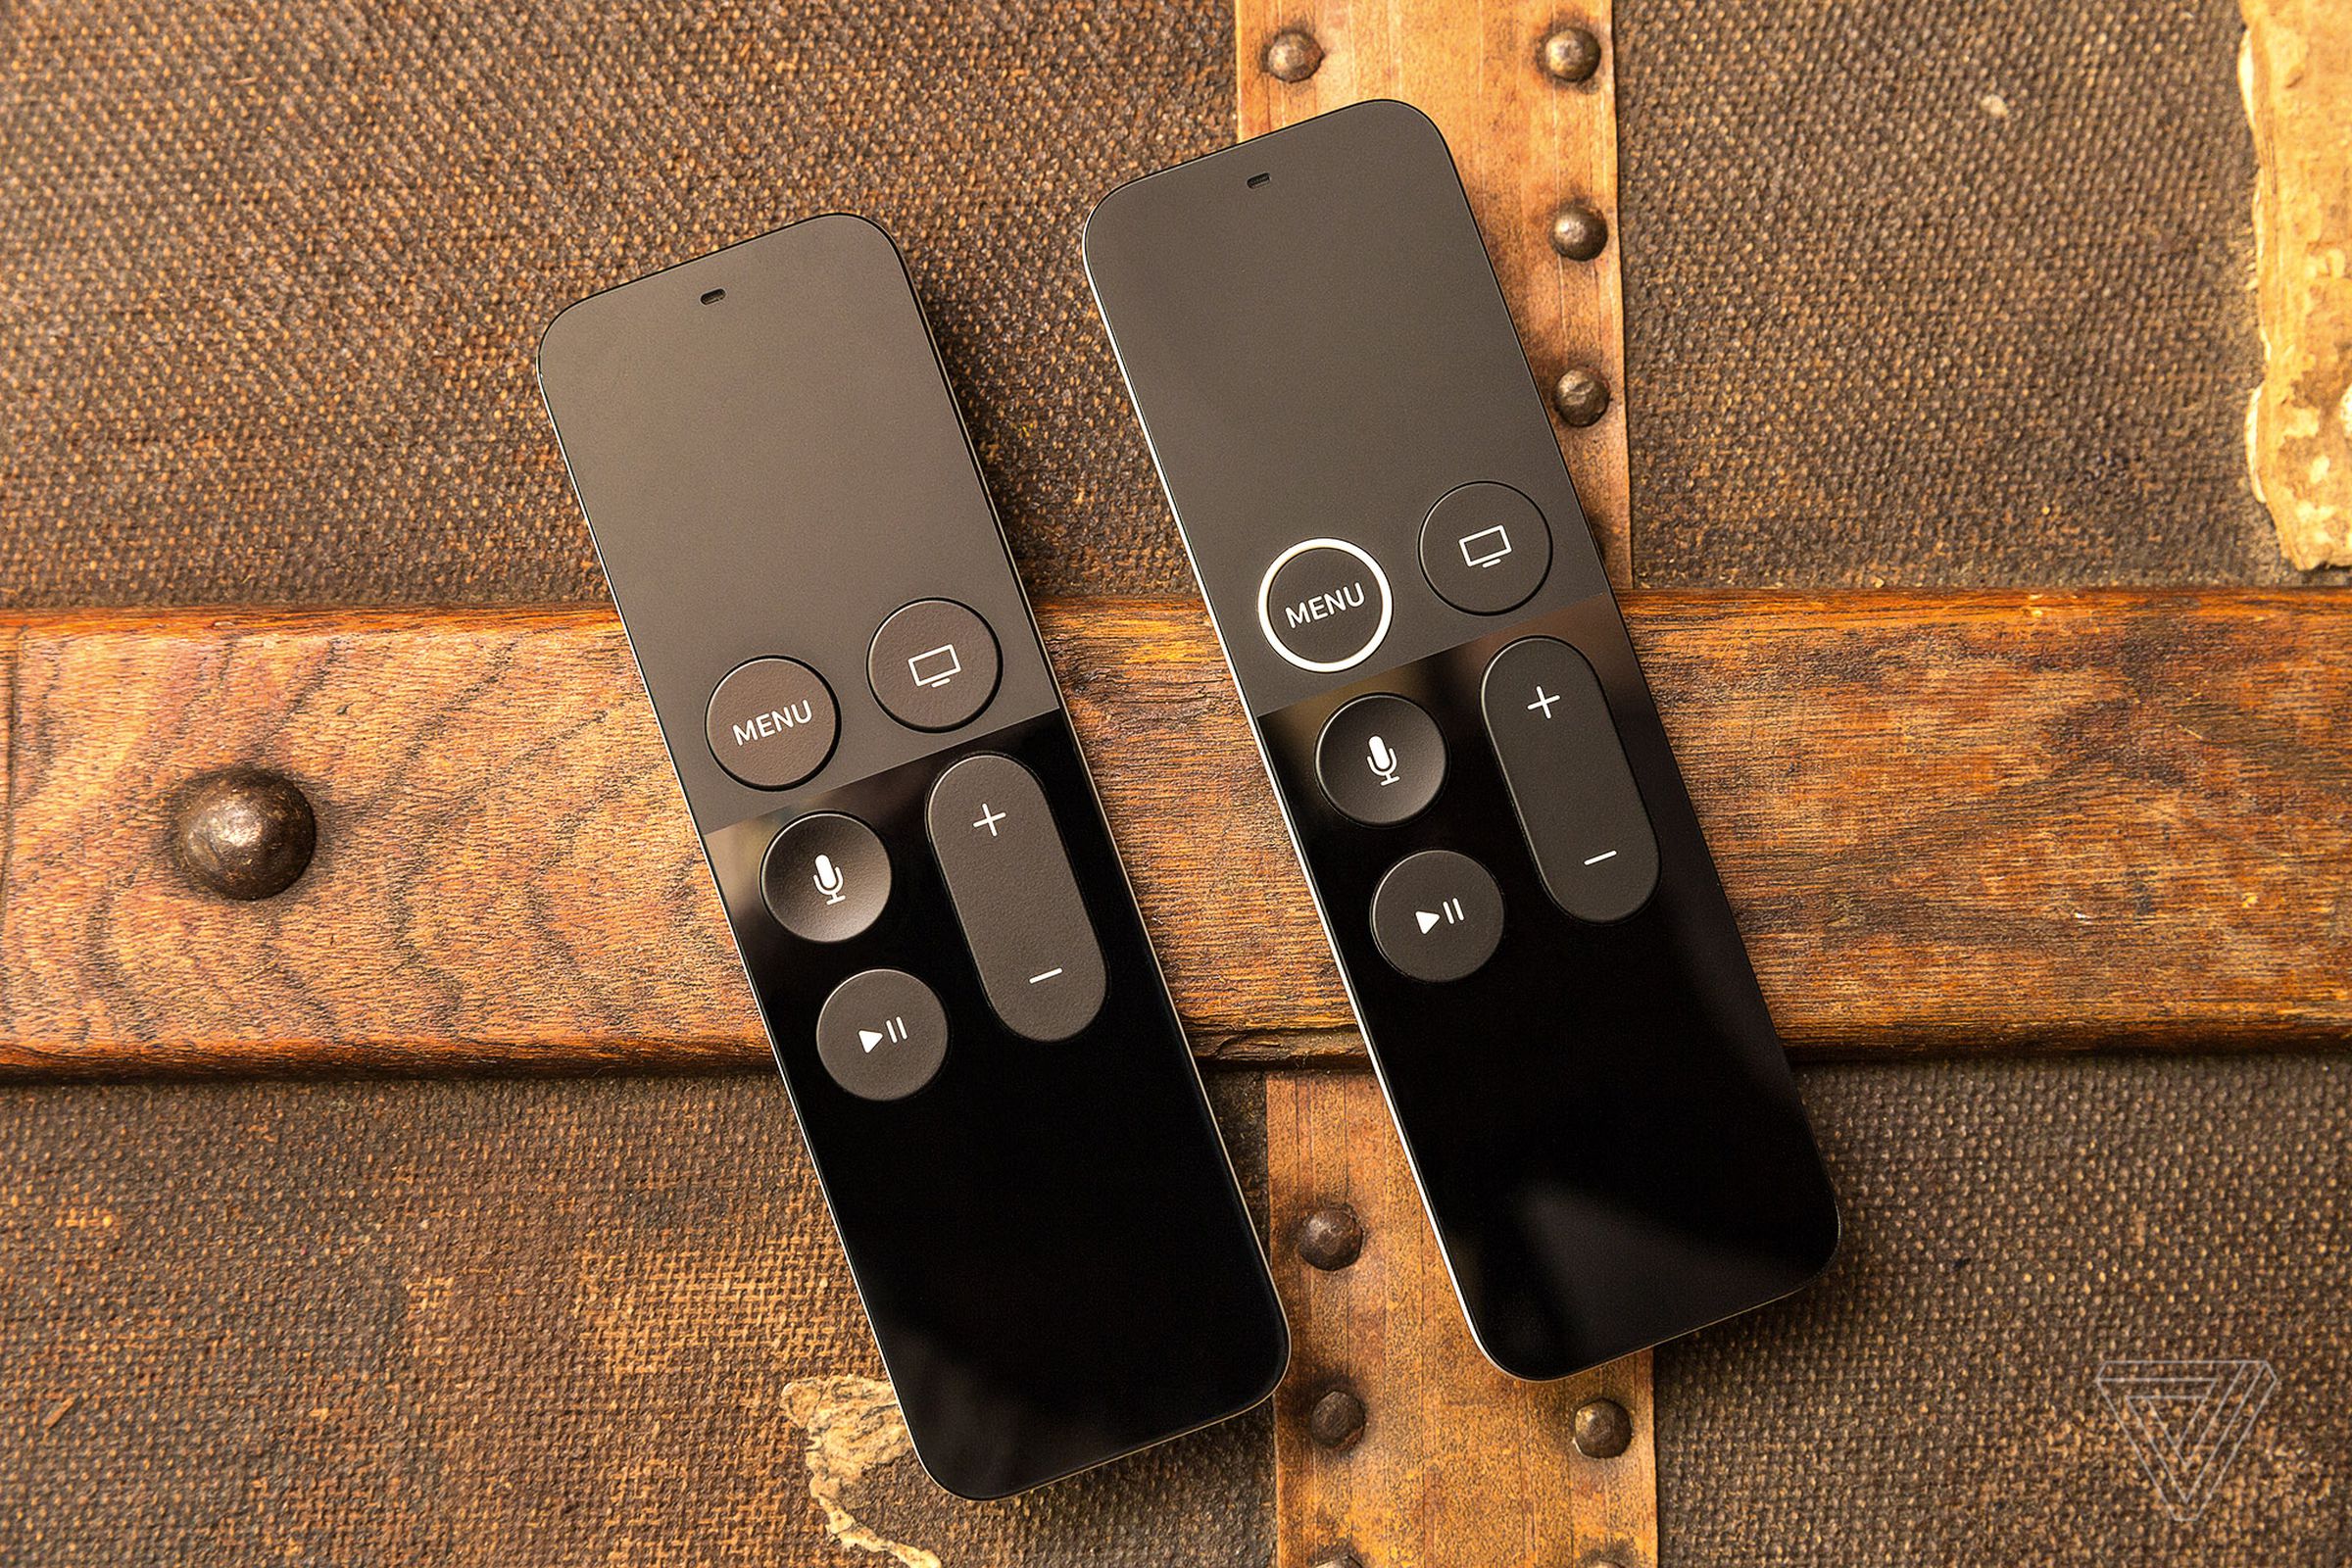 New Apple TV remote on the right, and the old one on the left.